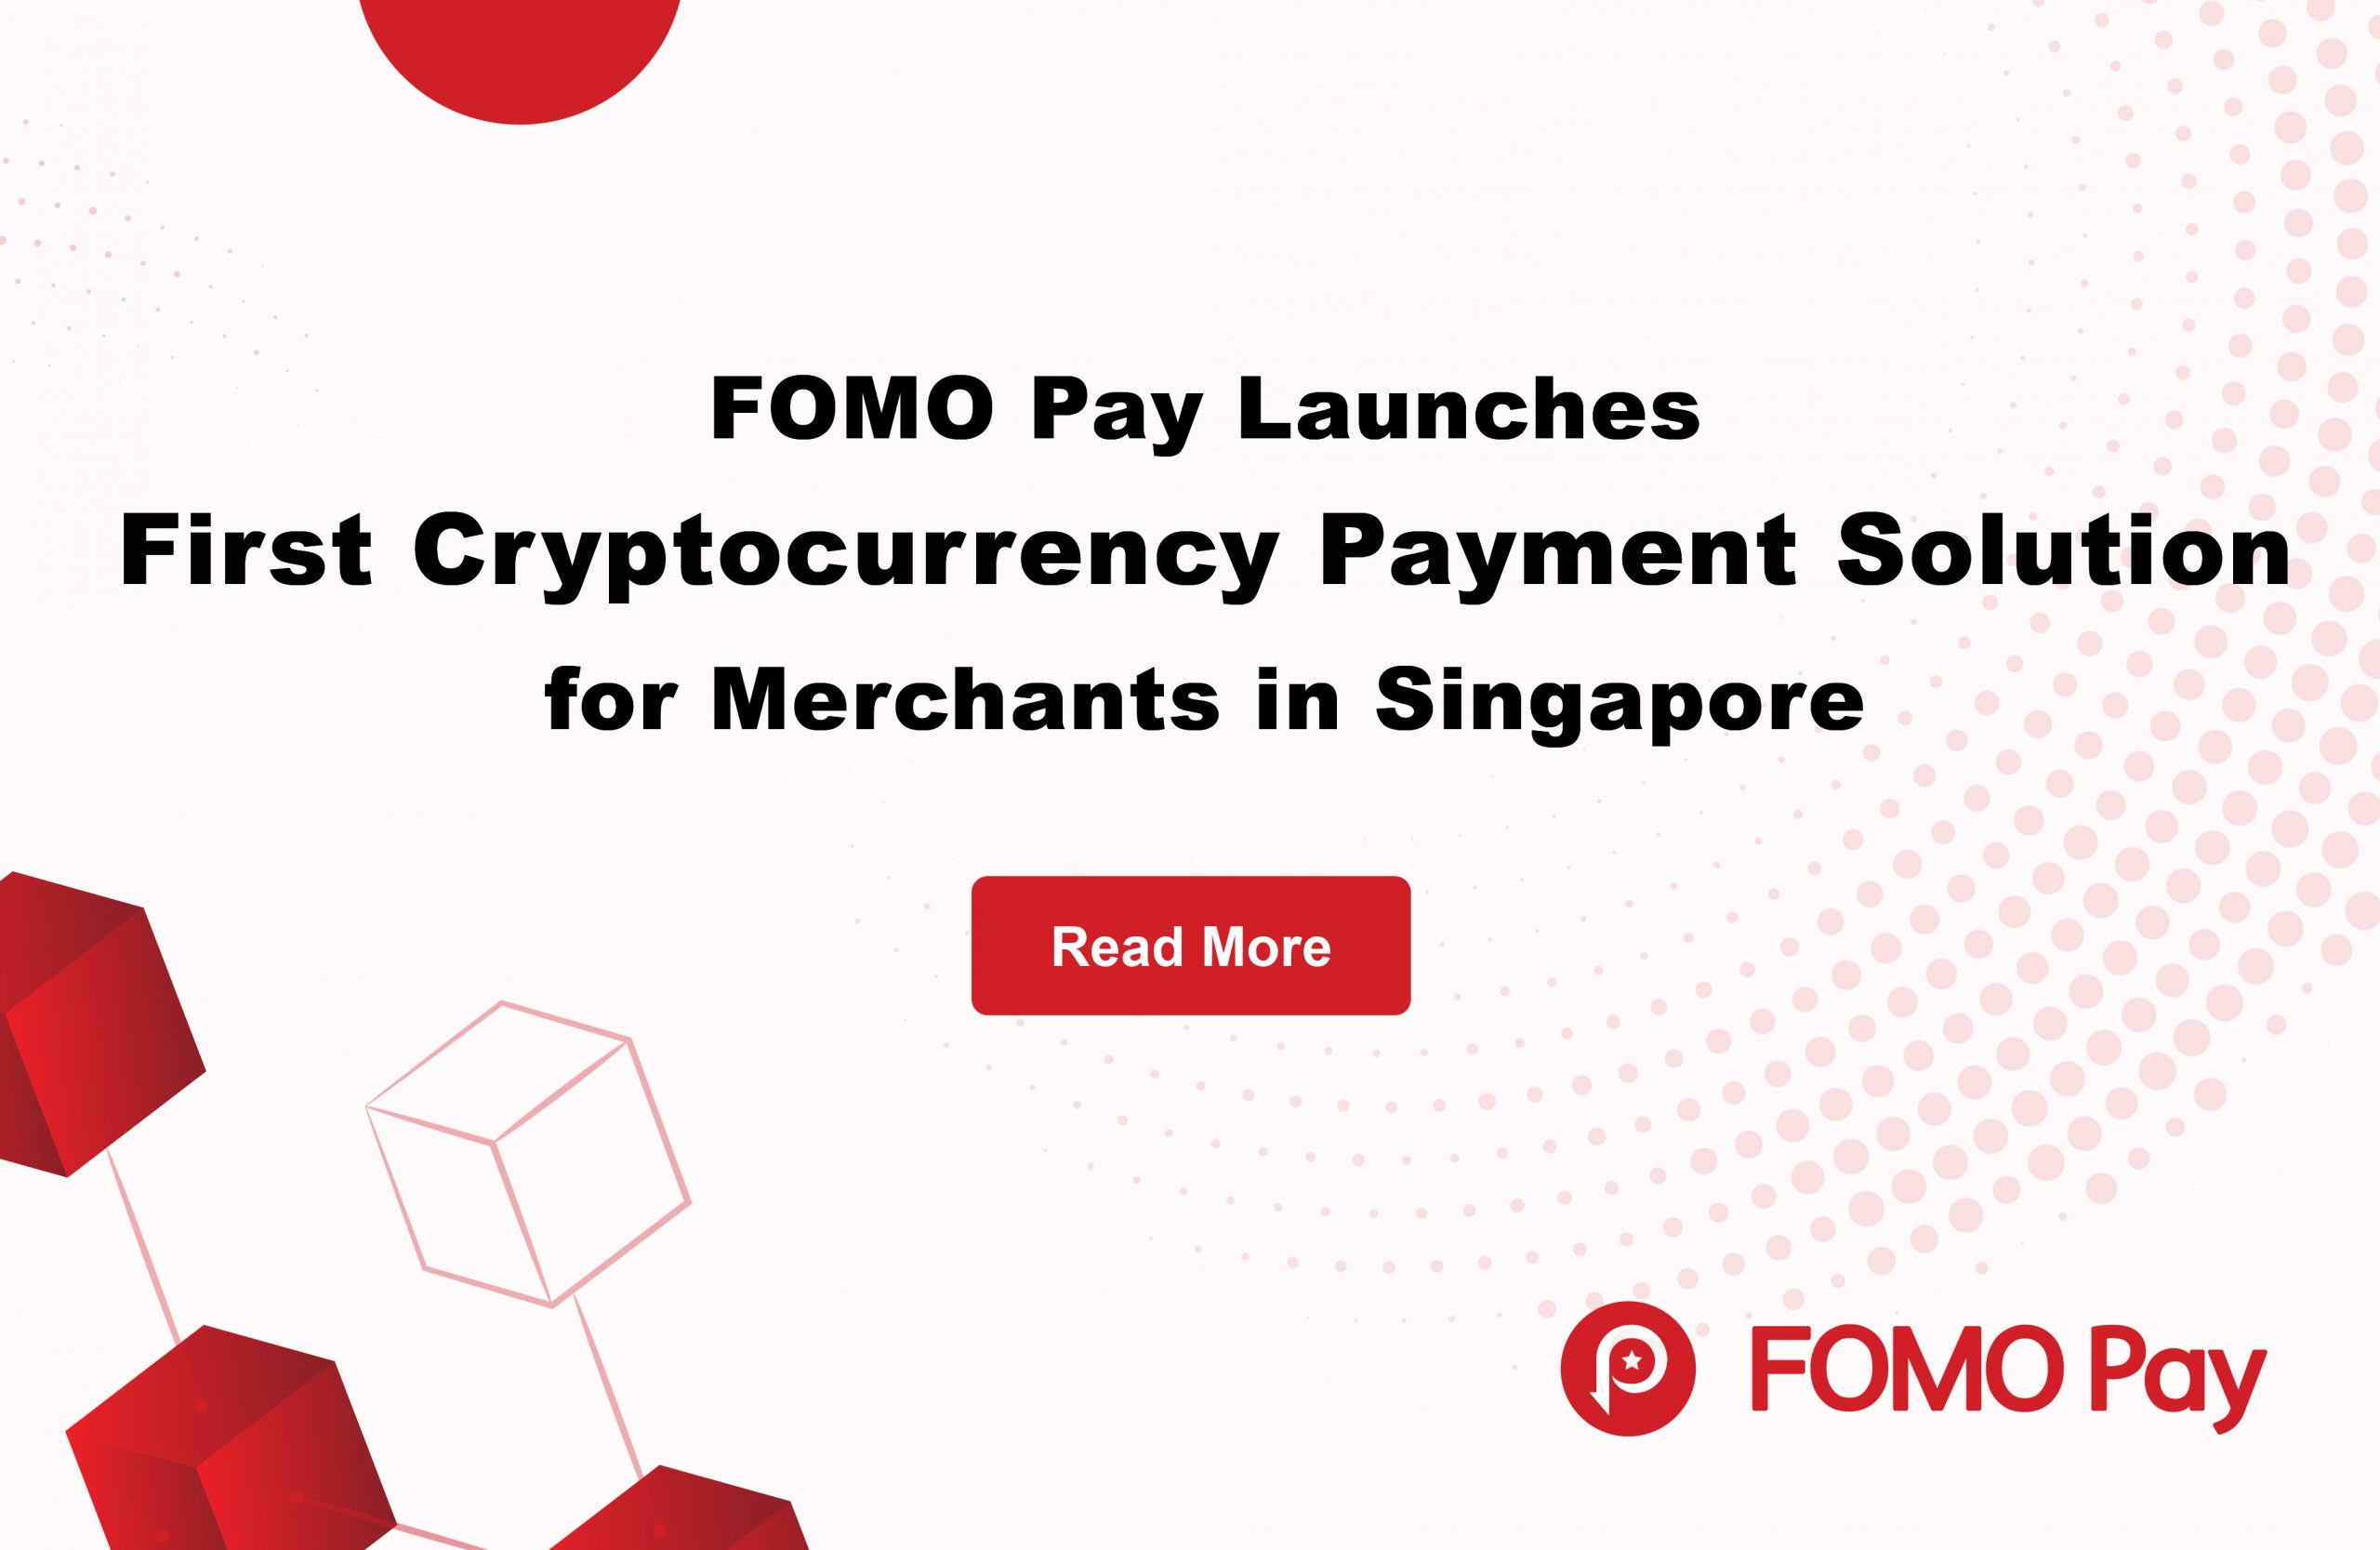 FOMO Pay unveils first cryptocurrency payment solution for retailers in Singapore